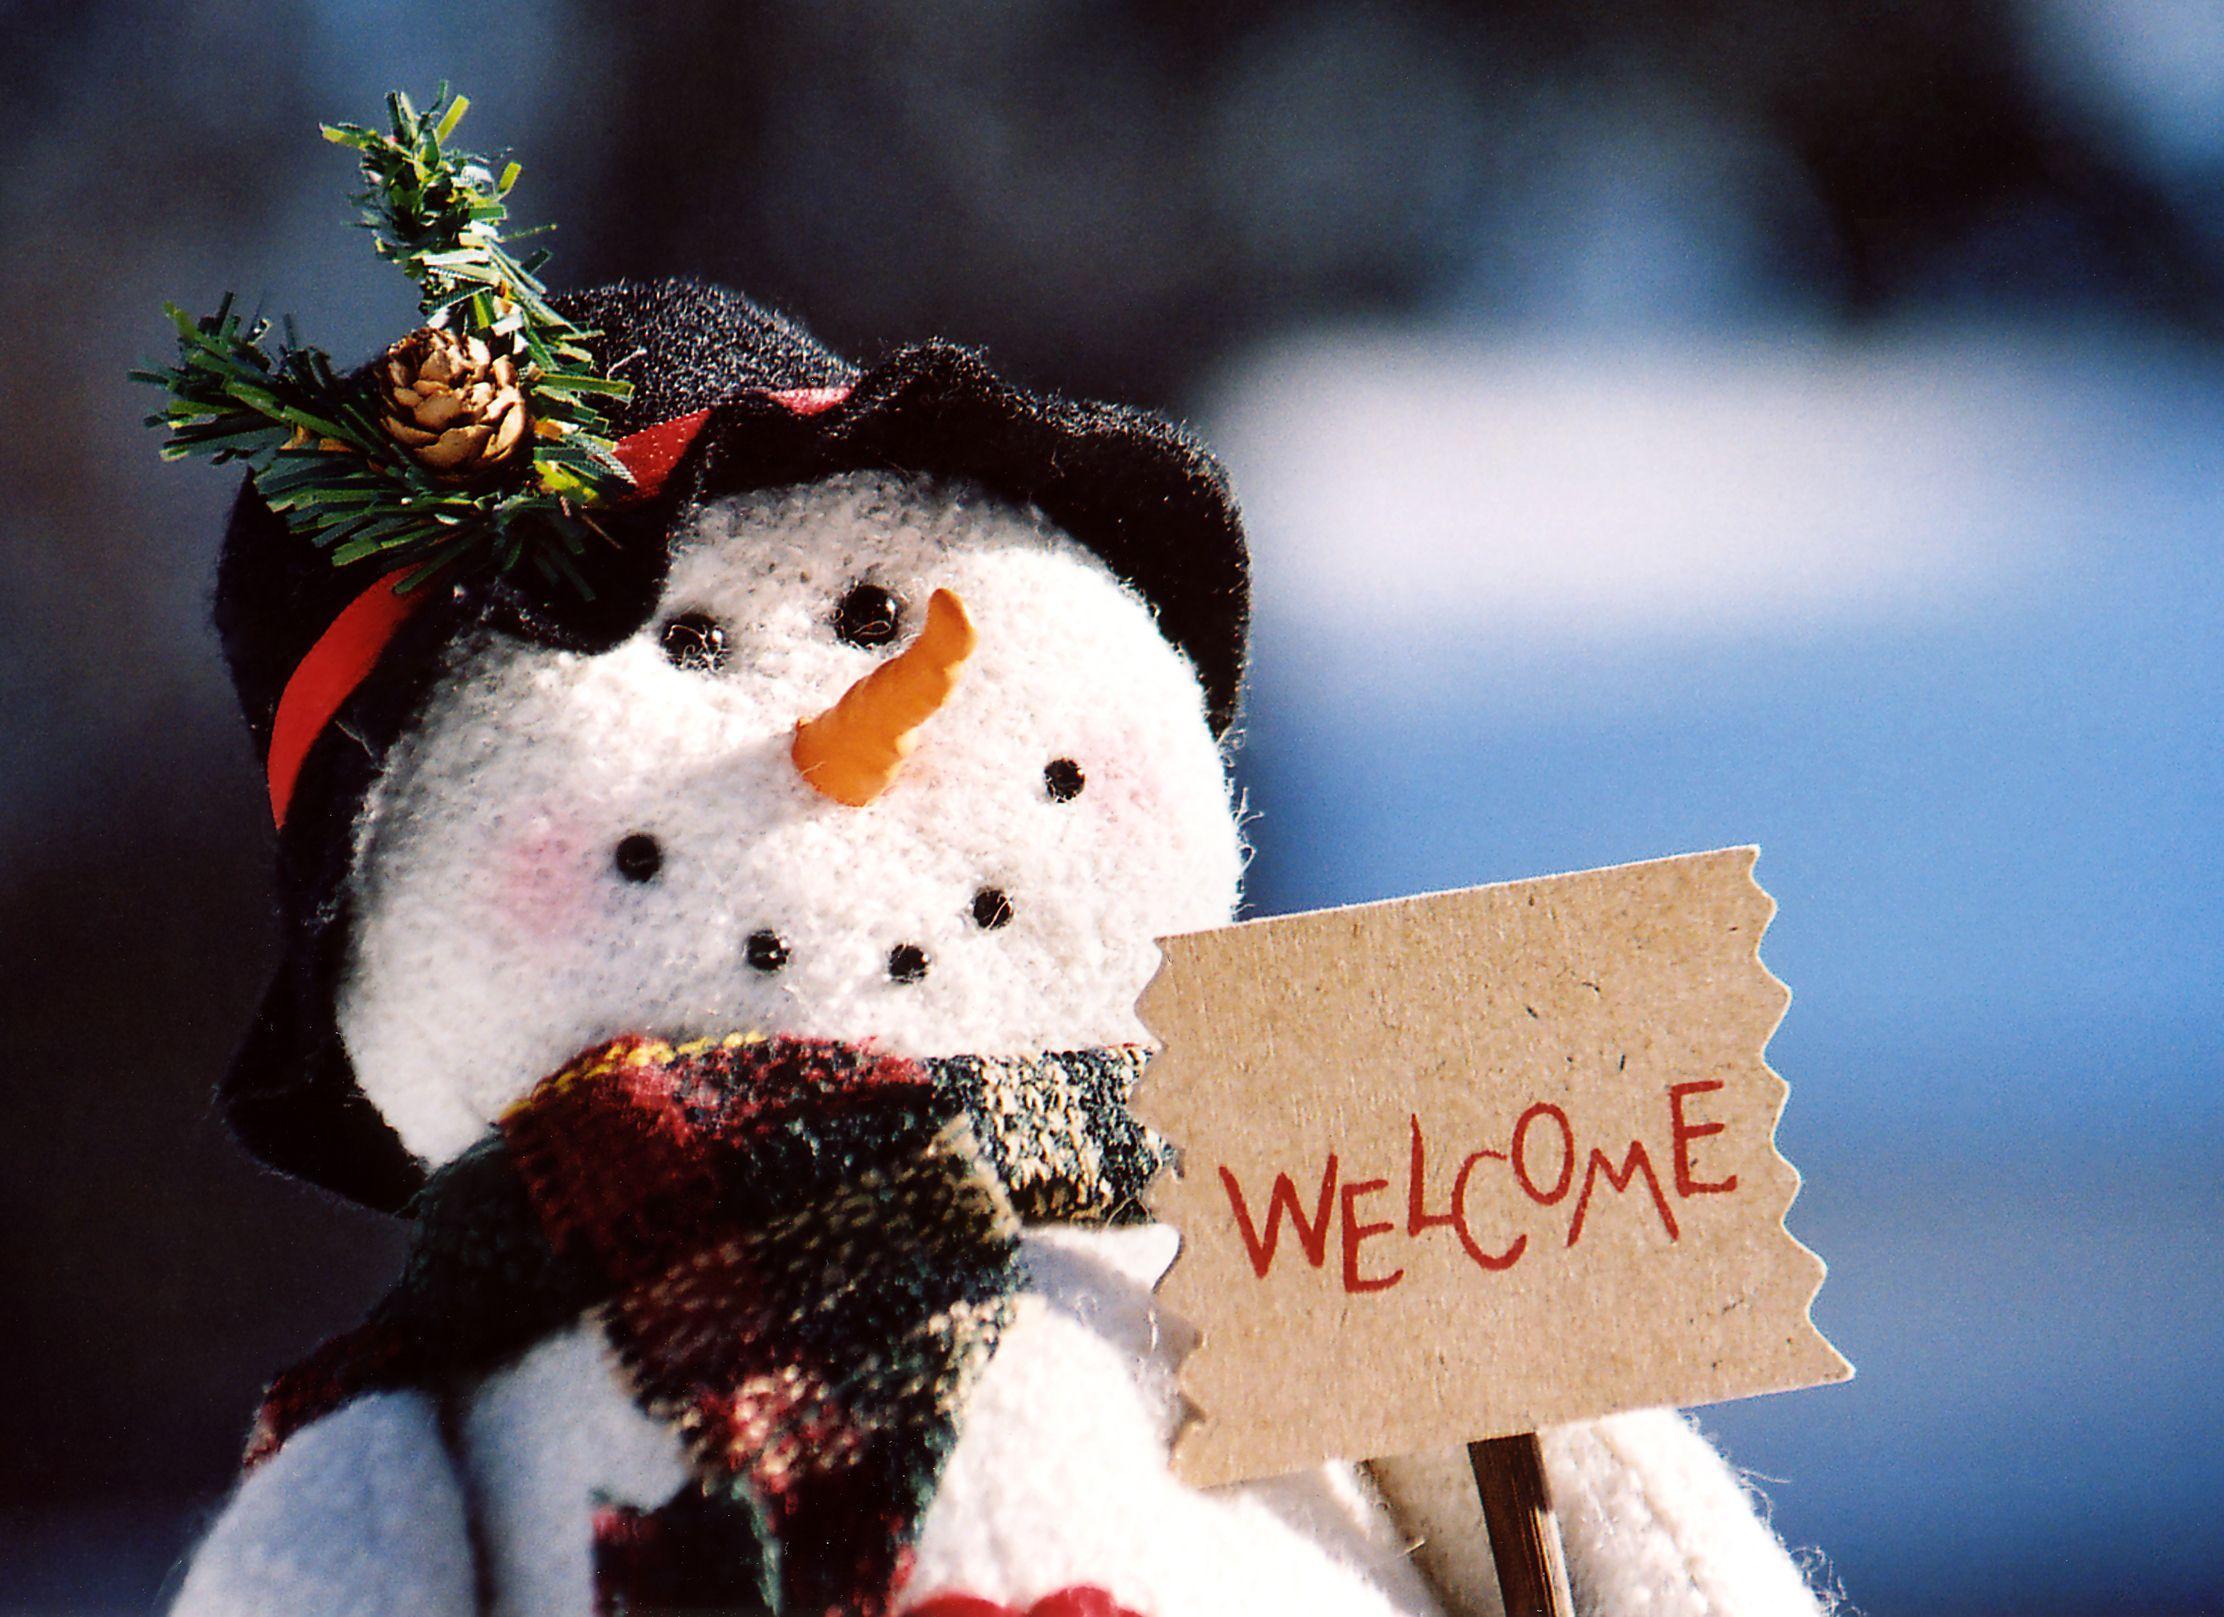 Welcome to Christmas wallpaper and image, picture